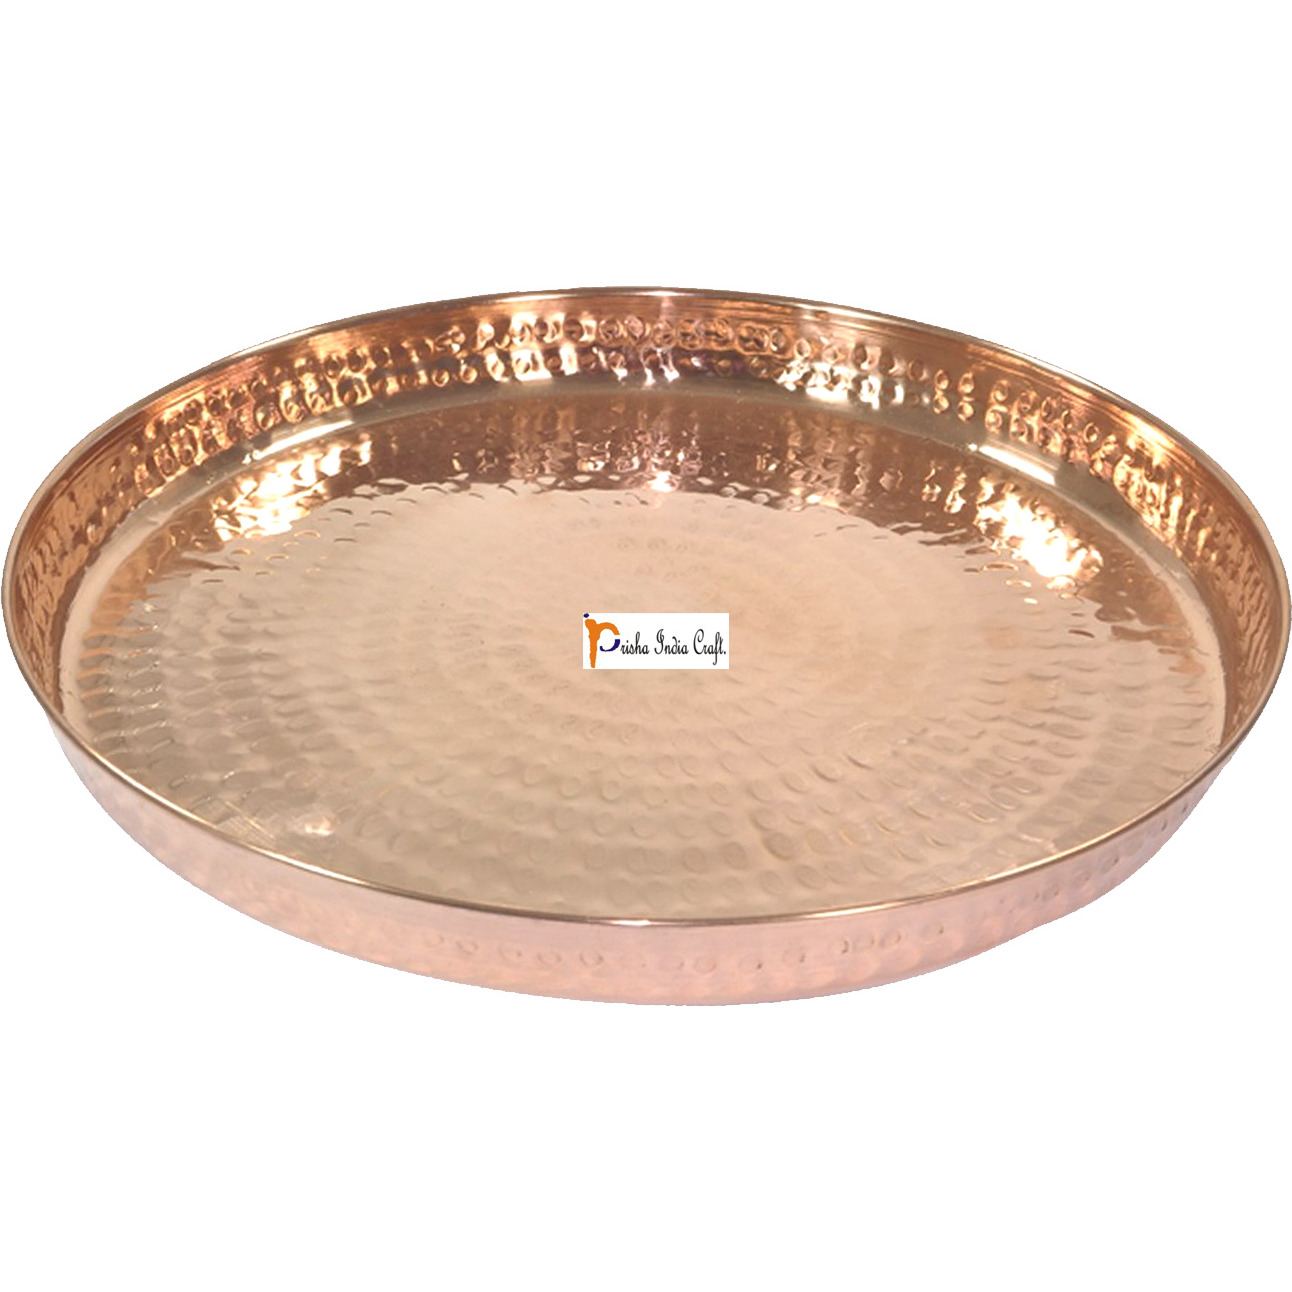 Prisha India Craft B. Best Dinnerware Pure Copper Thali Set Dia 12  Indian Traditional Dinner Set of Plate, Bowl, Spoons, Glass with Napkin ring and Coaster - Christmas Gift